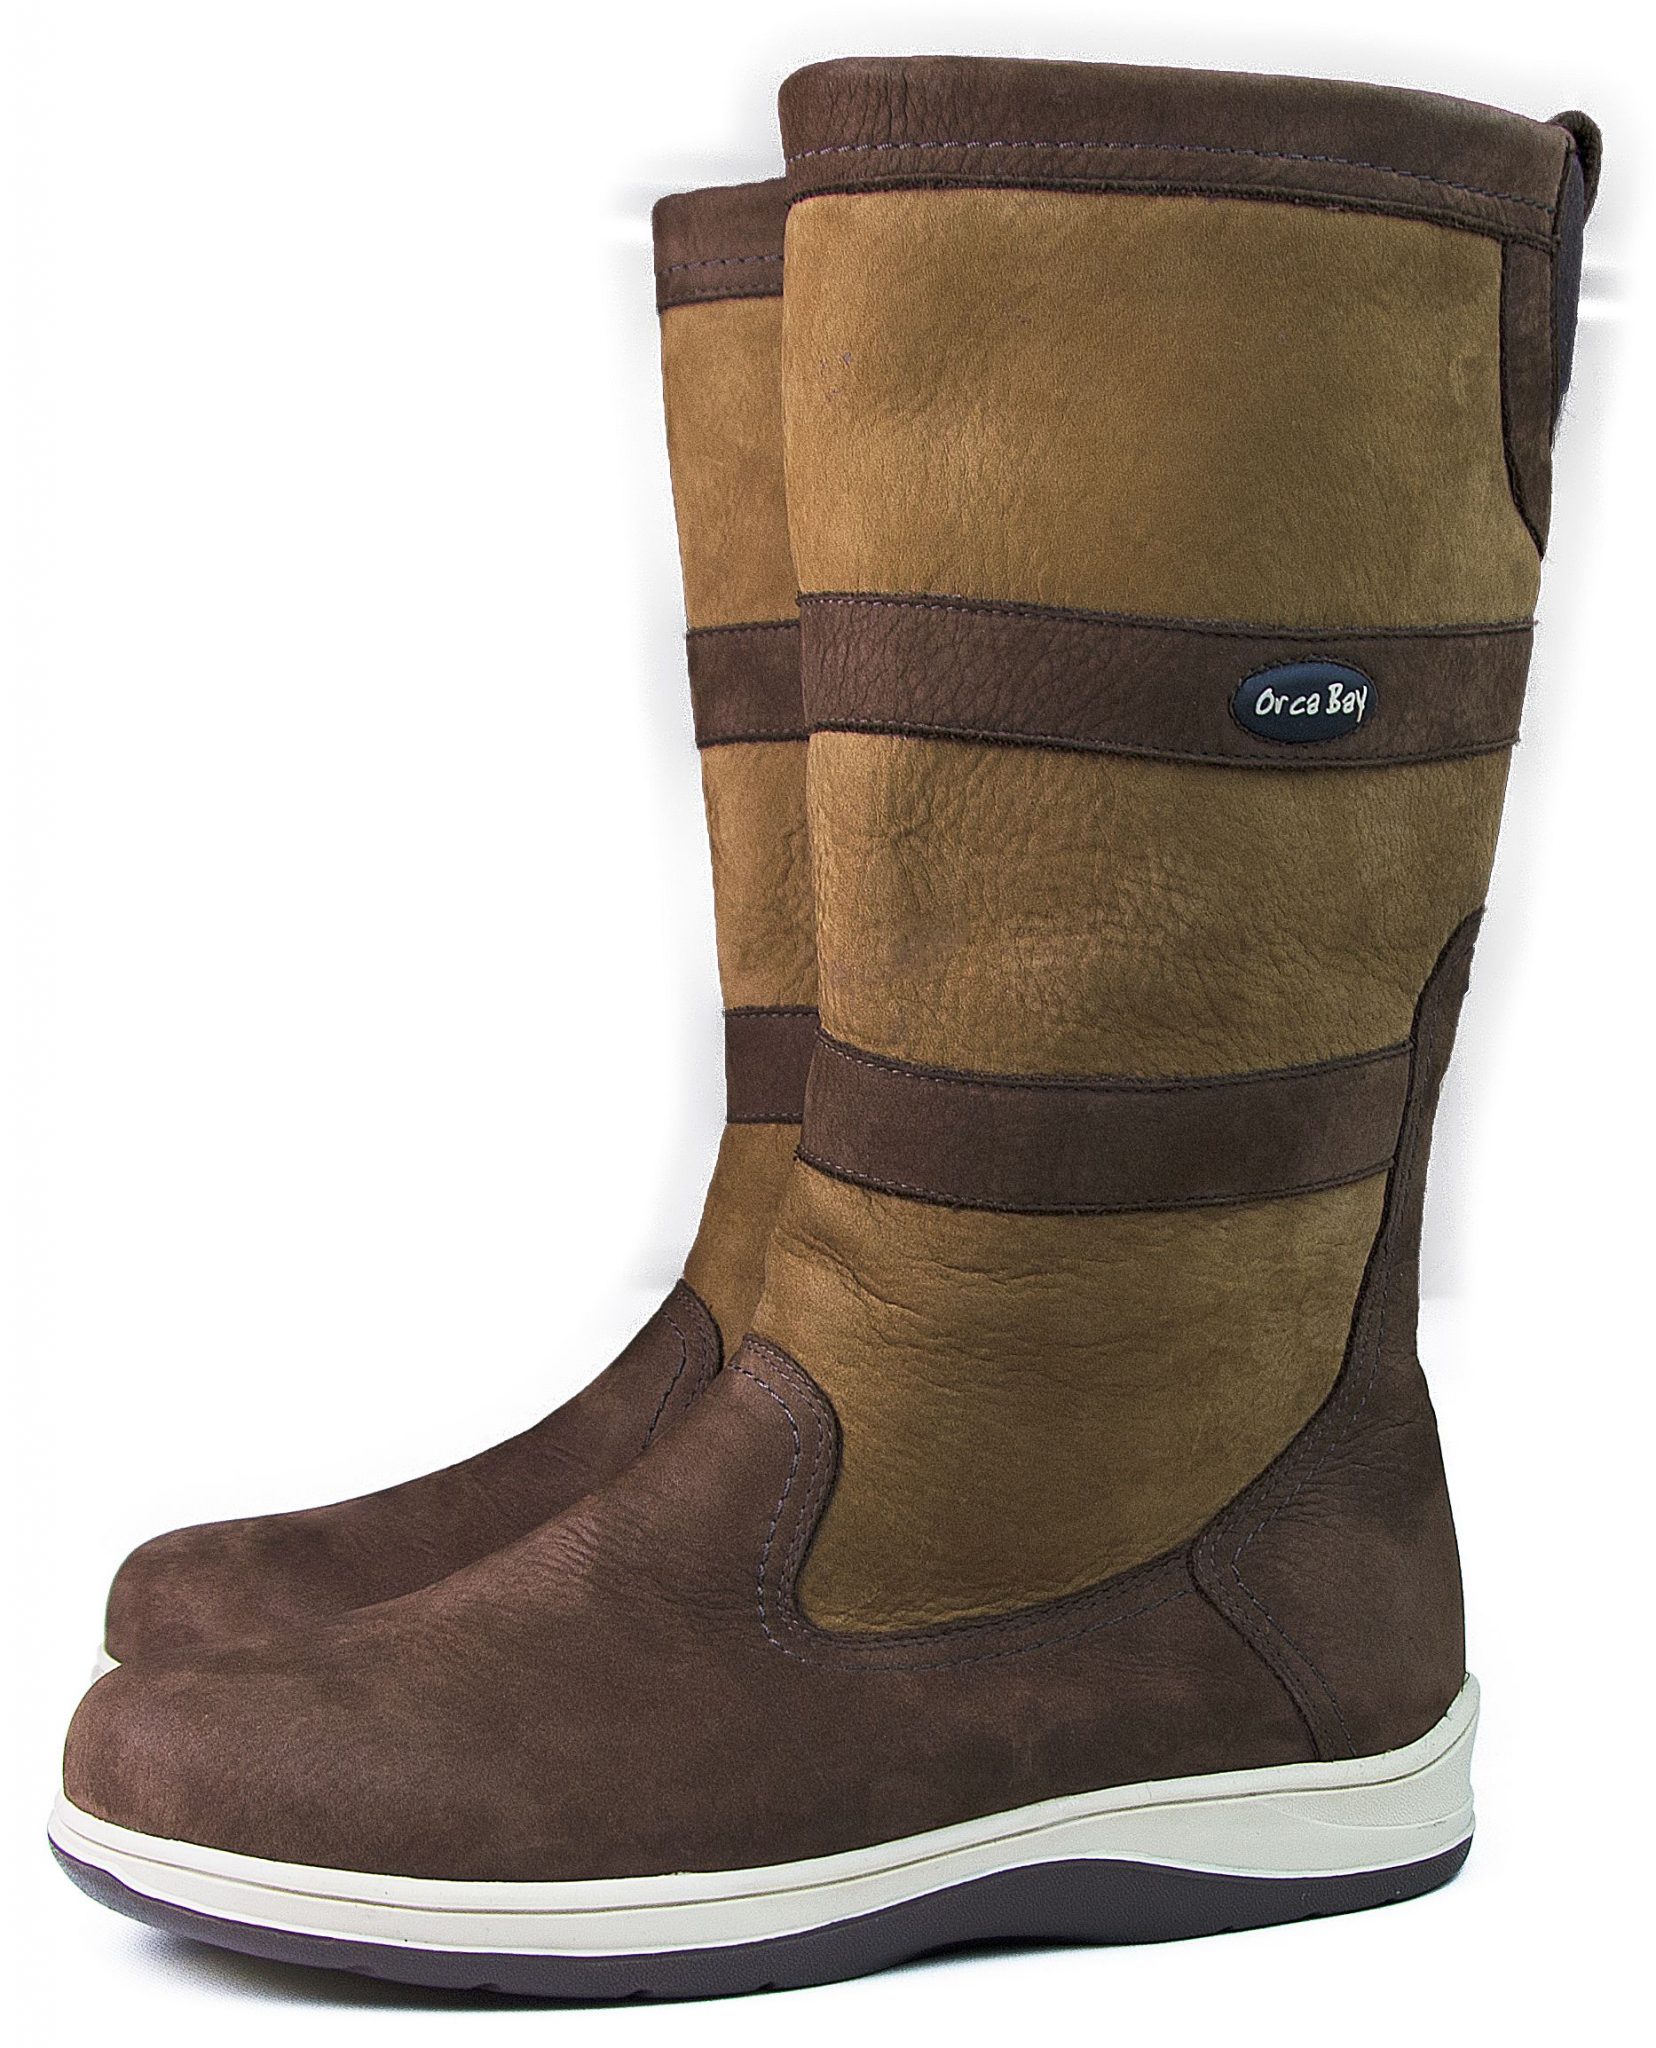 Orca Bay Storm Boots Brown